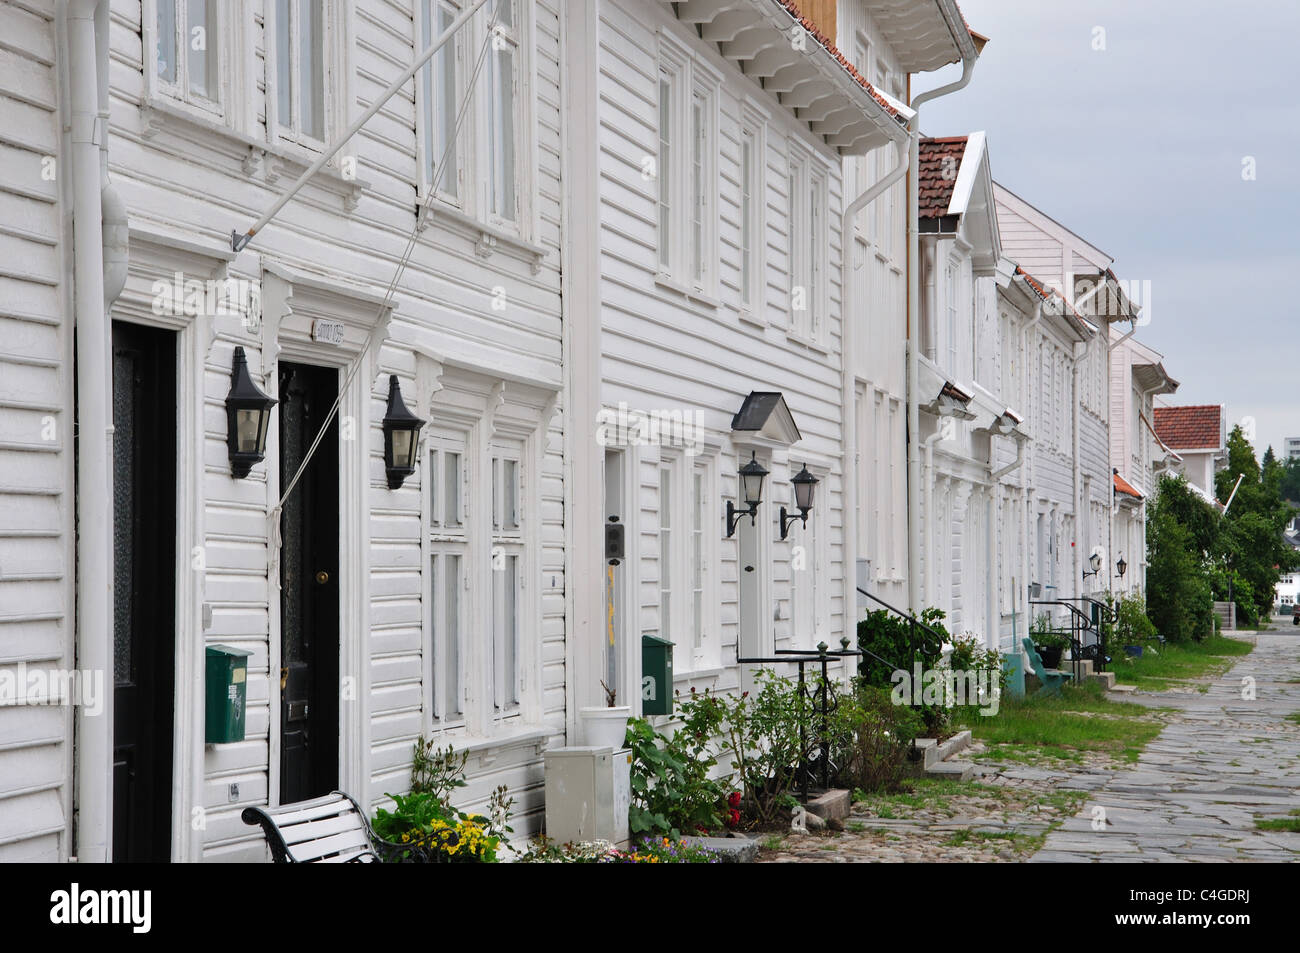 Old wooden buildings in Old Town District (Posebyen), Kristiansand (Christiansand), Agder County, Norway Stock Photo